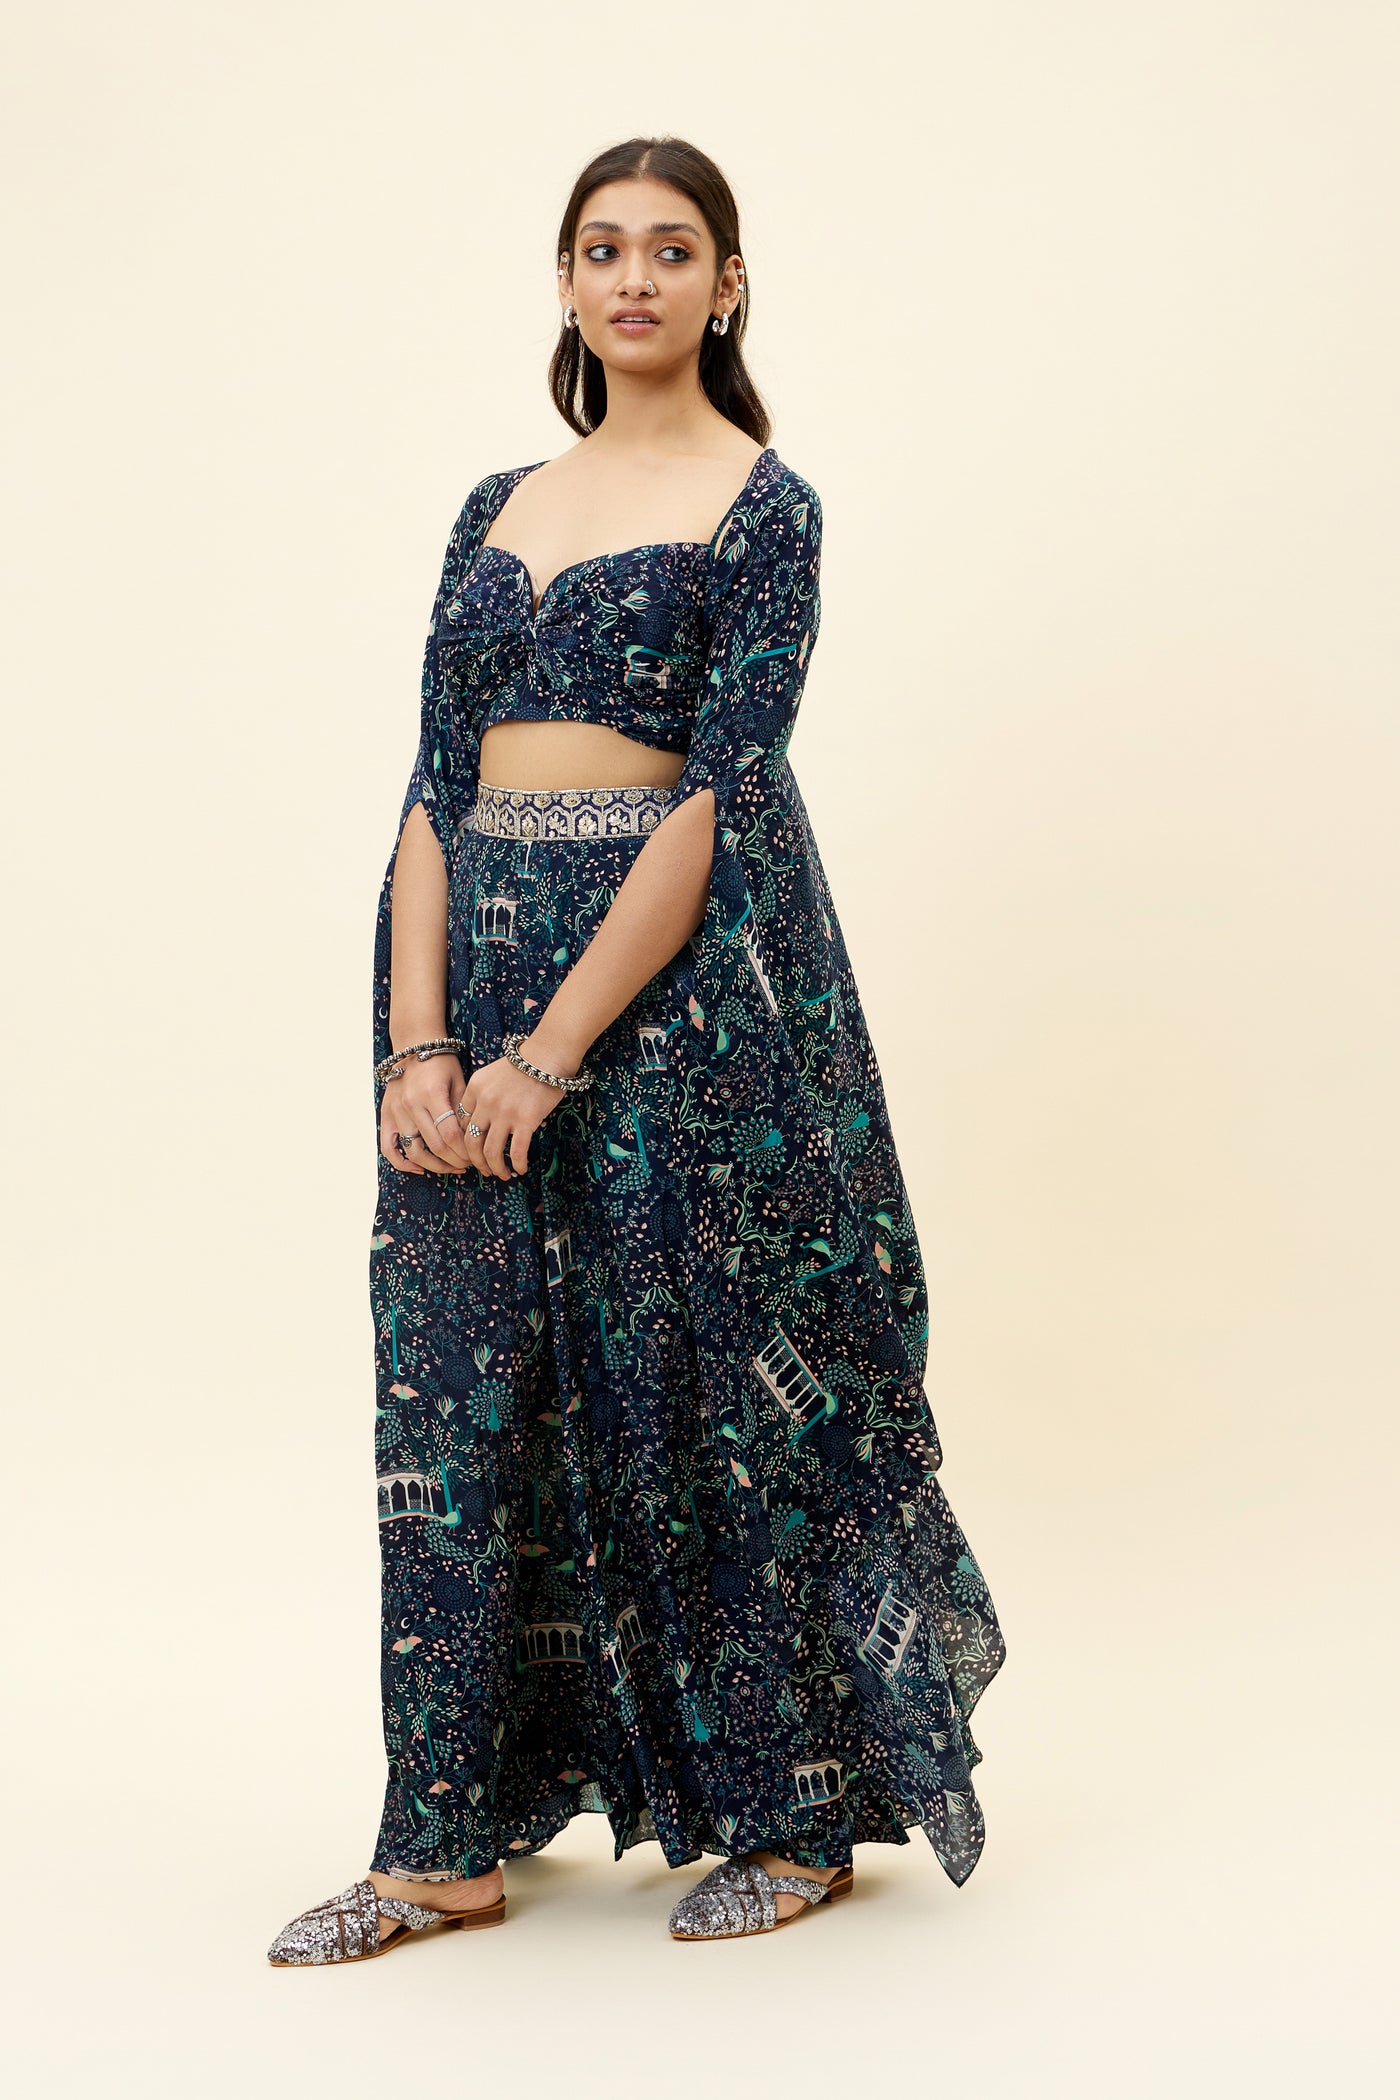 sva Blue Mor Jaal Print Box Pleated Pants With Bikini Bustier And Cape online shopping melange singapore indian designer wear